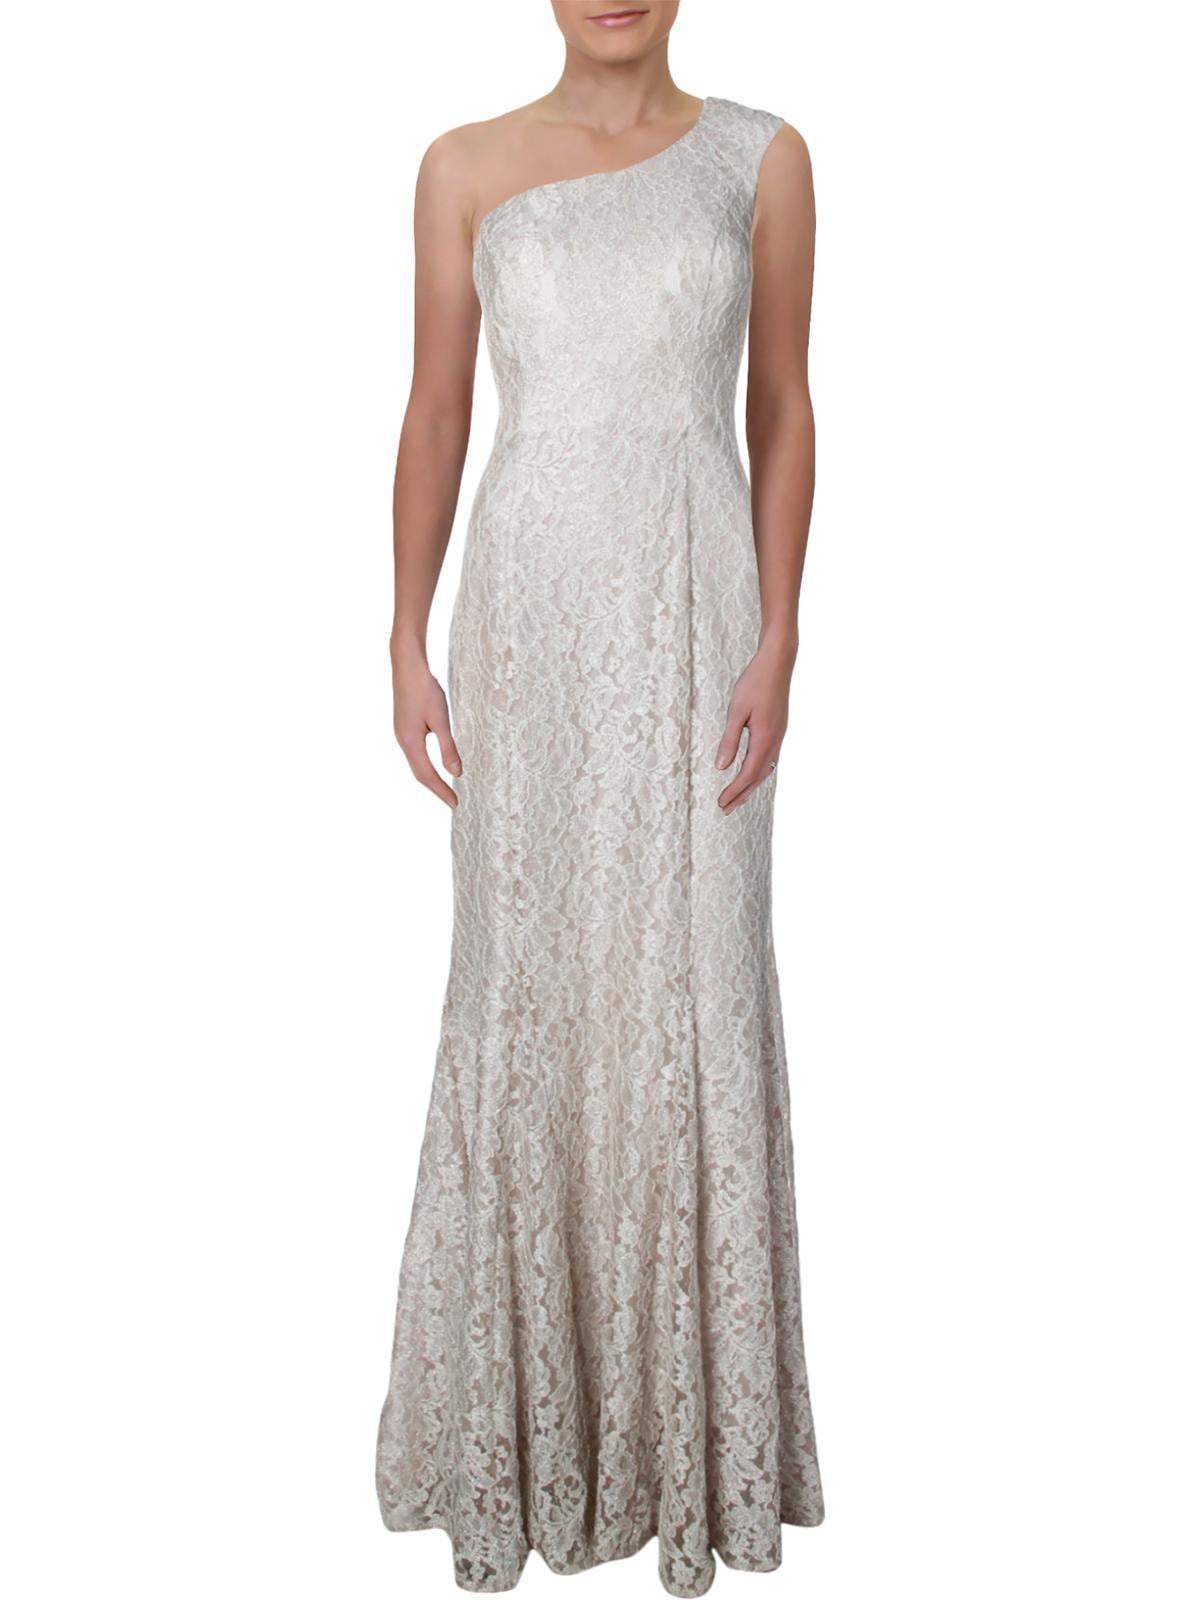 NW Nightway - NW Nightway Womens One Shoulder Lace Formal Dress Ivory